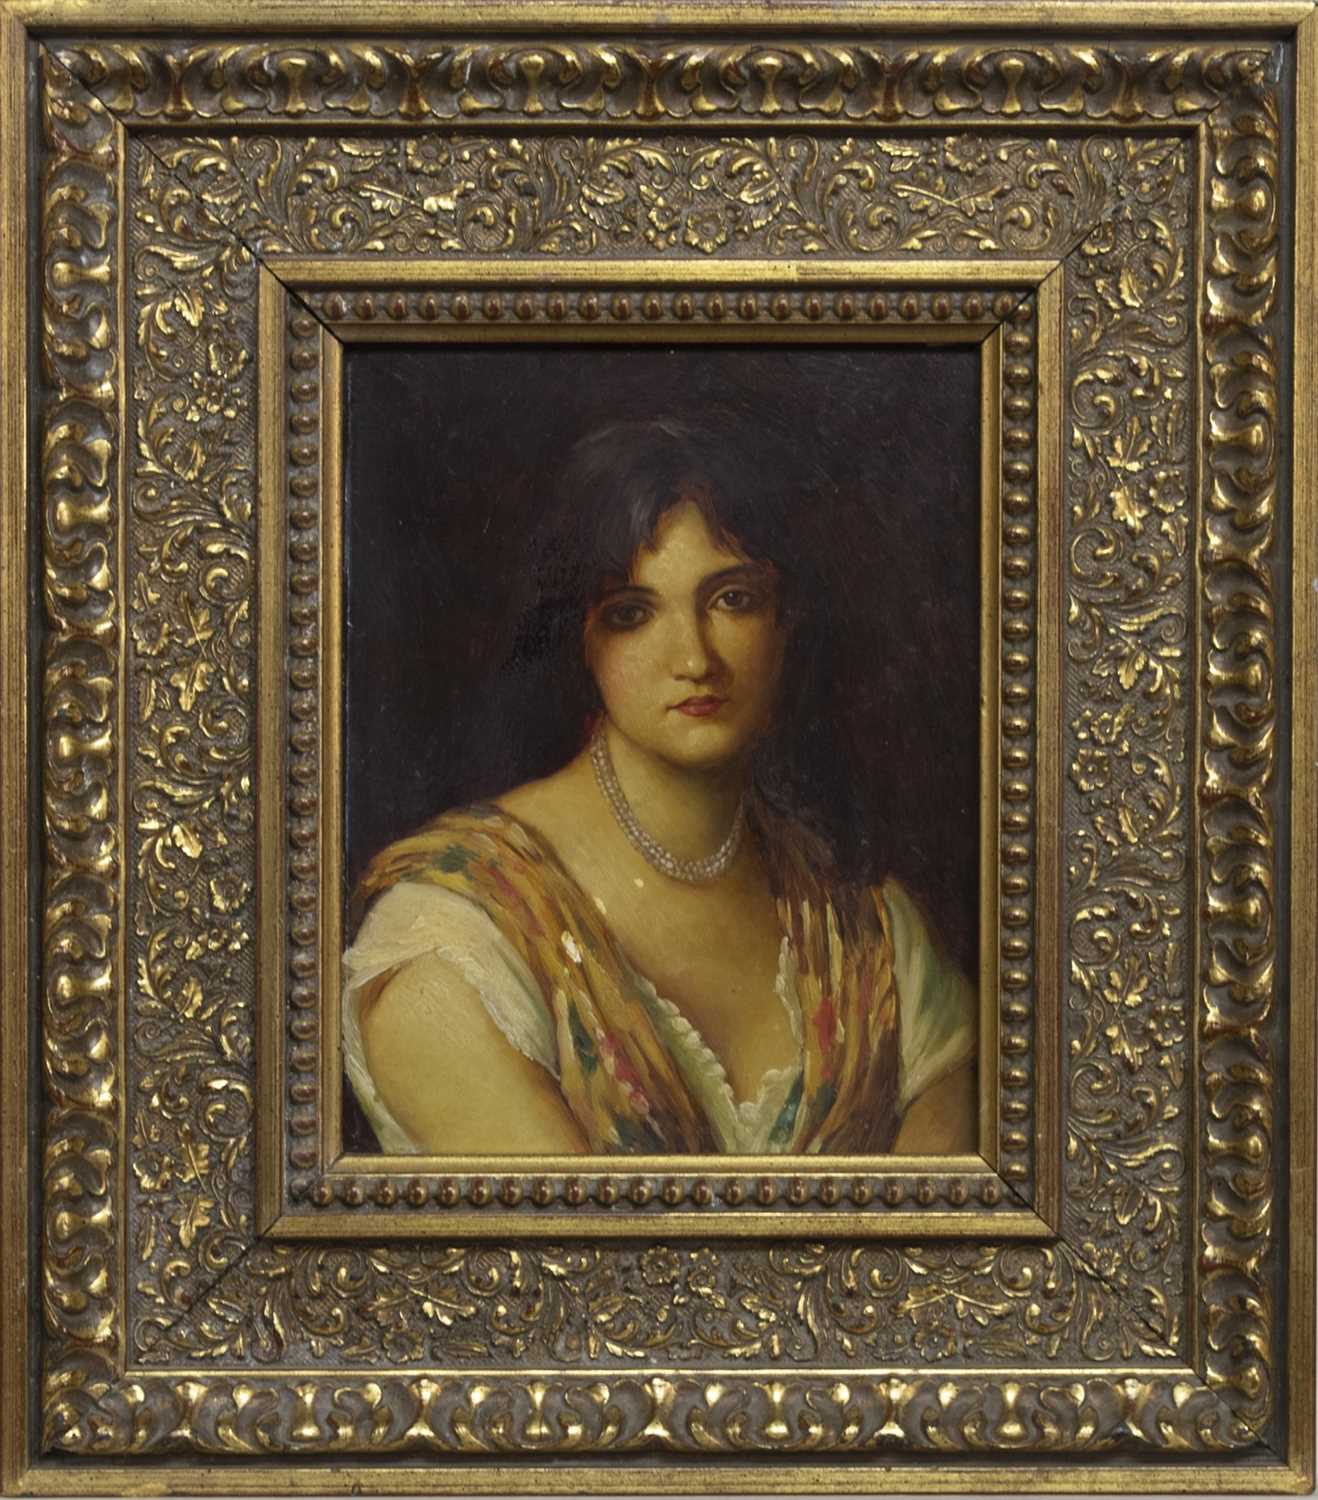 Lot 327 - HEAD AND SHOULDERS PORTRAIT OF A YOUNG WOMAN, AN OIL IN THE MANNER OF 'SPANISH' PHILIP